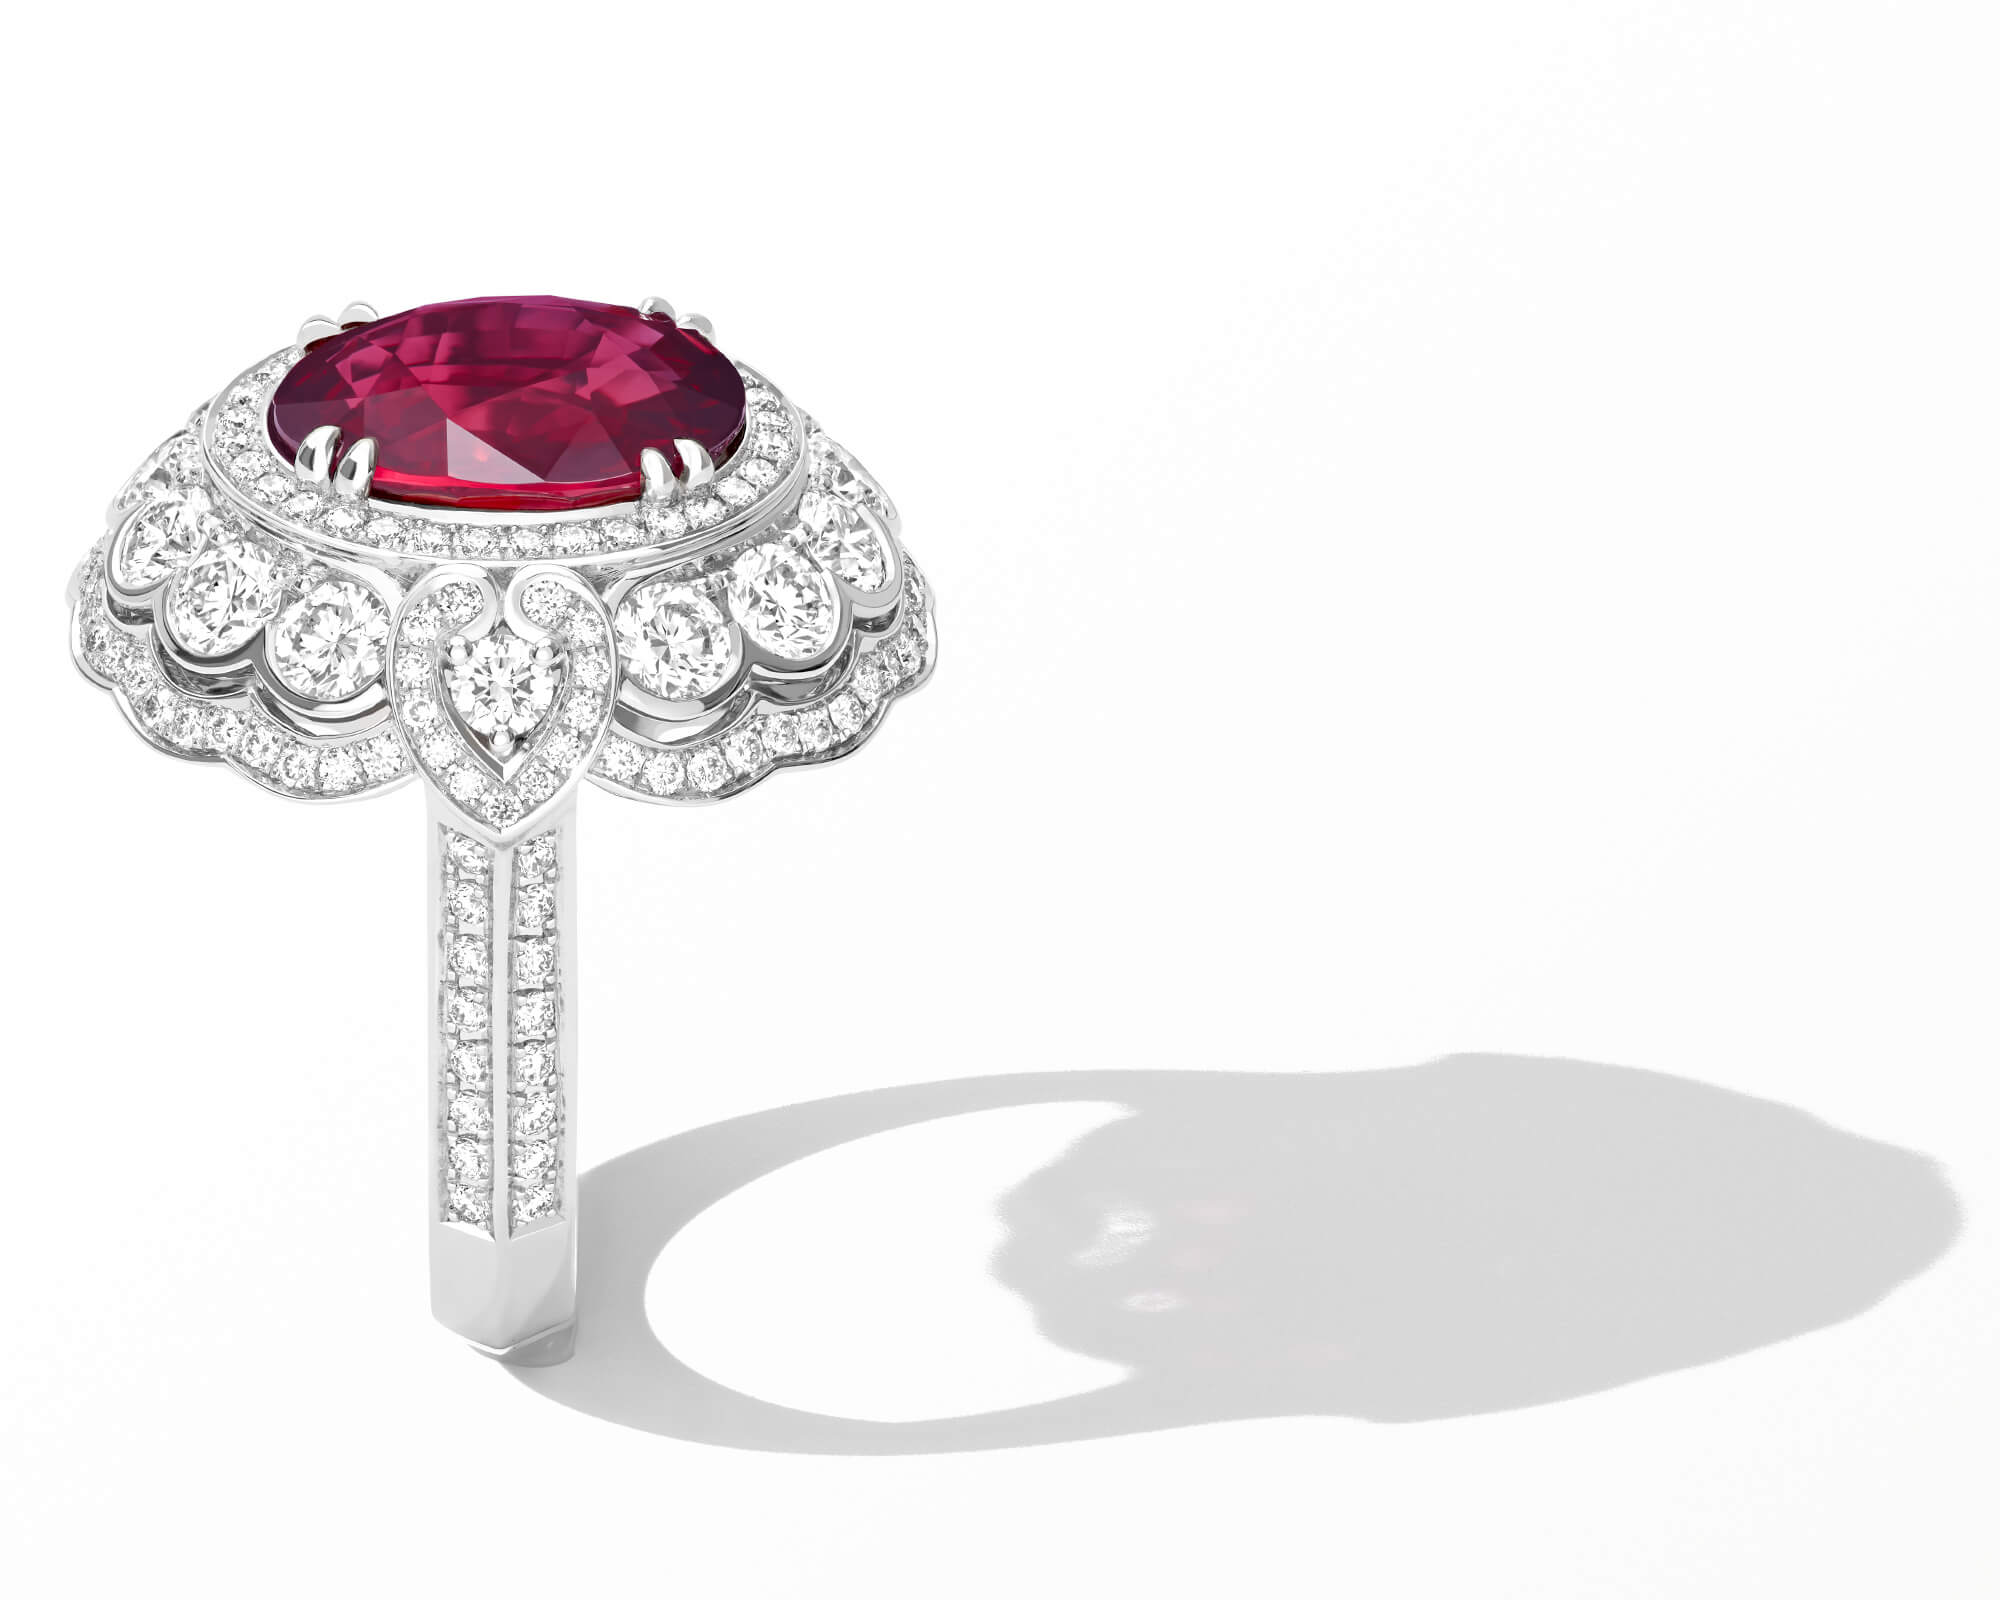 A Garrard Jewelled Vault ring set with a central oval ruby with a round white diamond surround adjusted